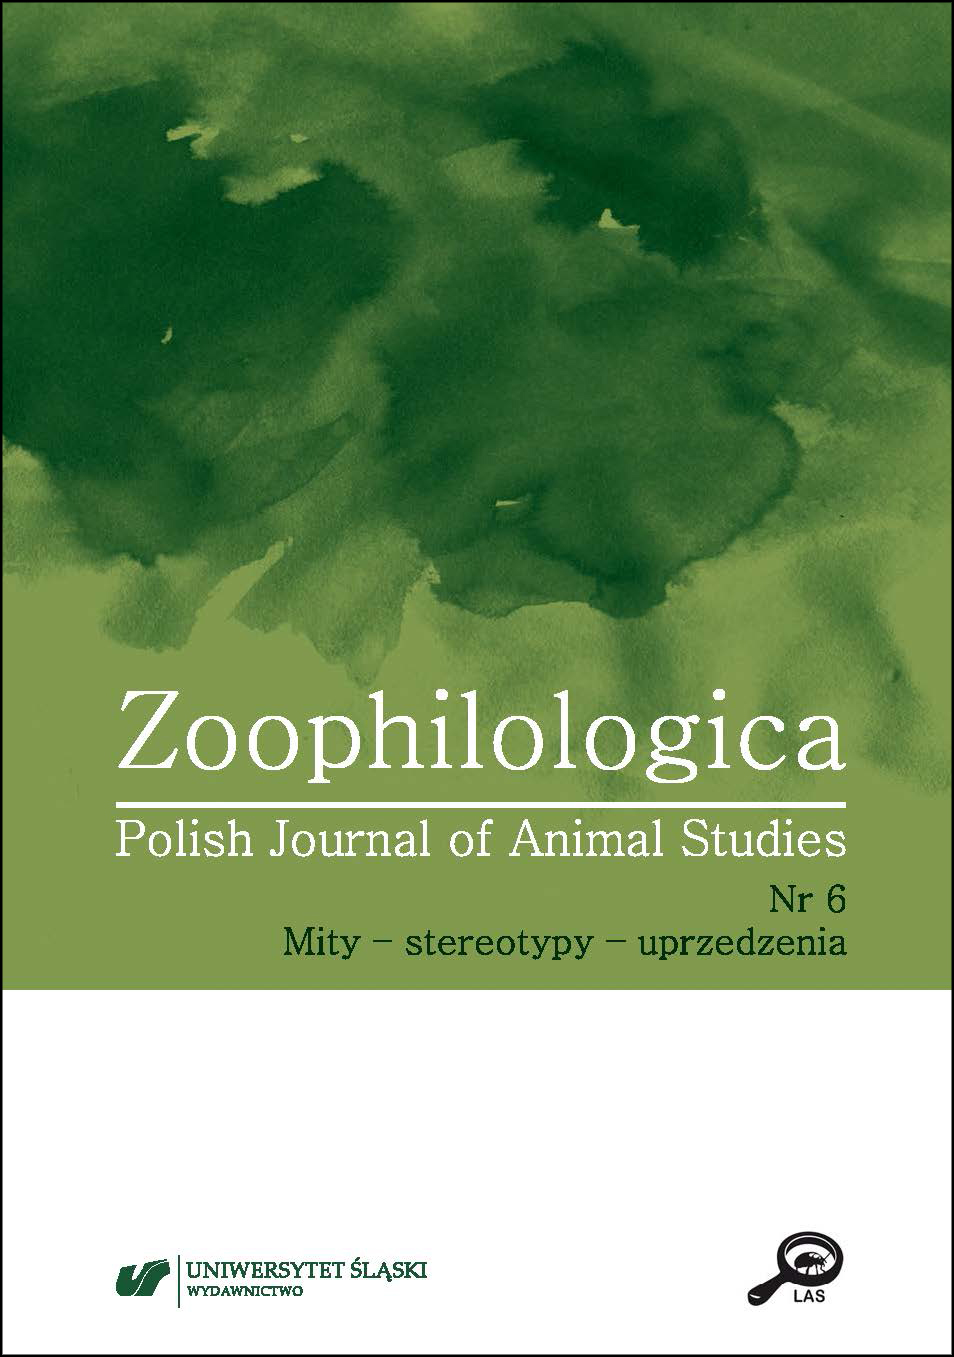 Ethics in the Age of Man. Minimal Ethics for the Anthropocene of Joanna Żylińska from the Perspective Animal Studies. [A Review of a Book Minimal Ethics for the Anthropocene by Joanna Żylińska. Open Humanities Press, University of Michigan Library, A Cover Image